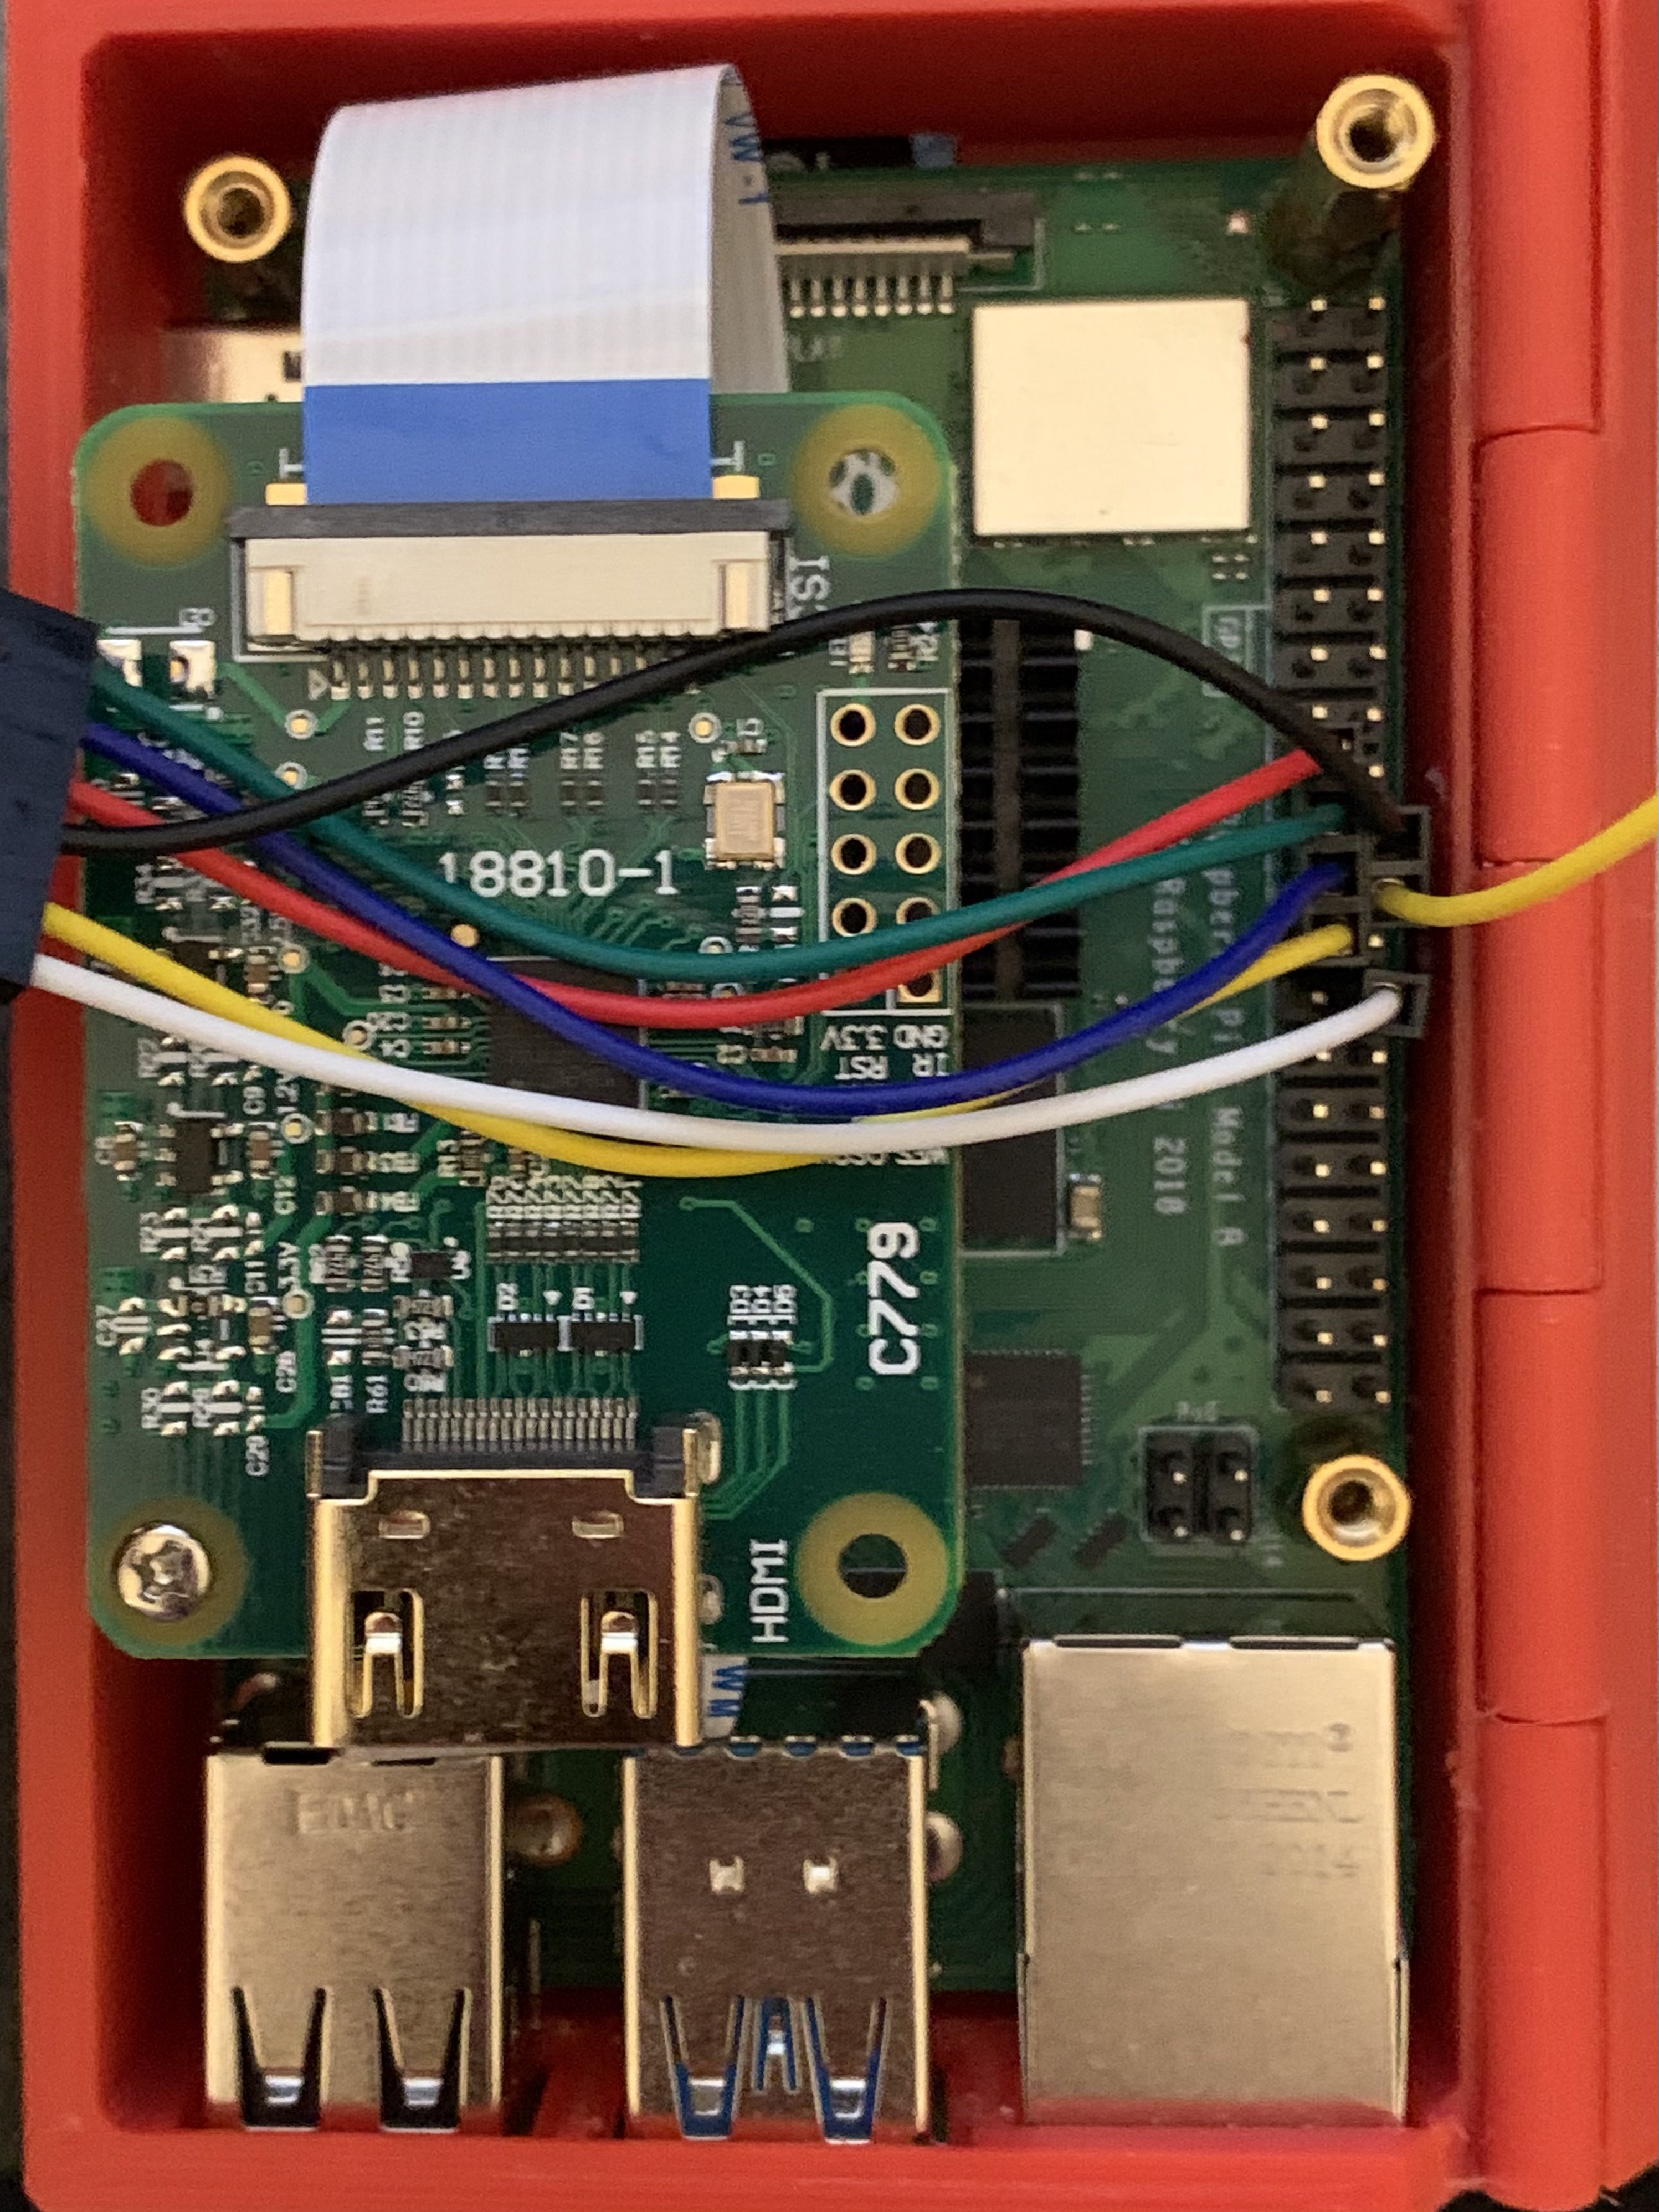 A closeup of the Raspberry Pi wired to the breadboard.